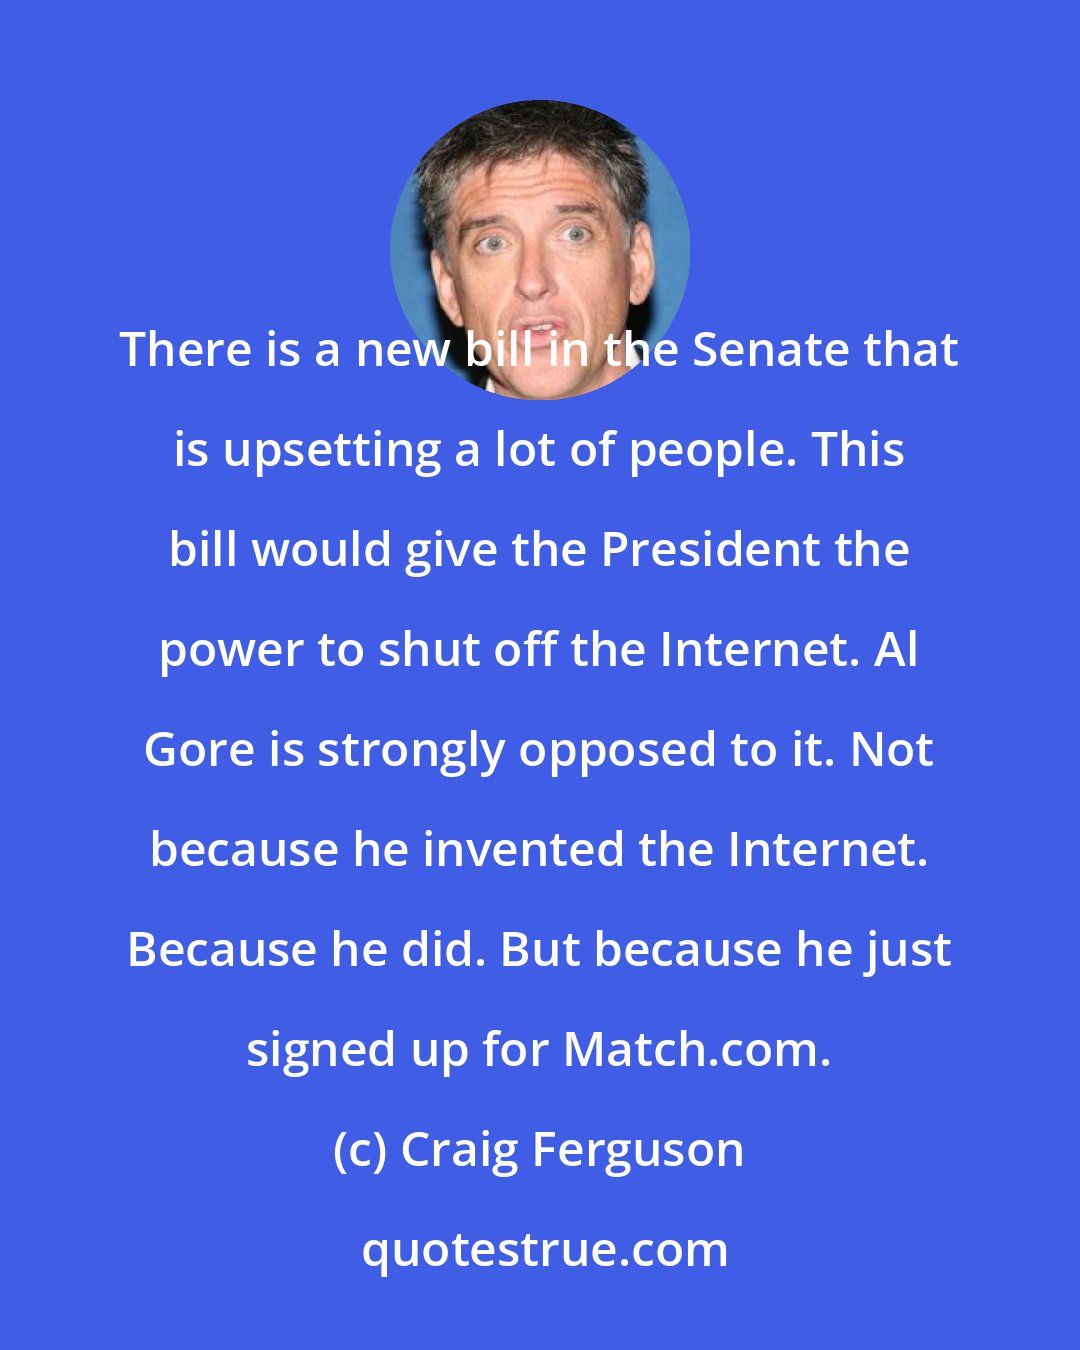 Craig Ferguson: There is a new bill in the Senate that is upsetting a lot of people. This bill would give the President the power to shut off the Internet. Al Gore is strongly opposed to it. Not because he invented the Internet. Because he did. But because he just signed up for Match.com.